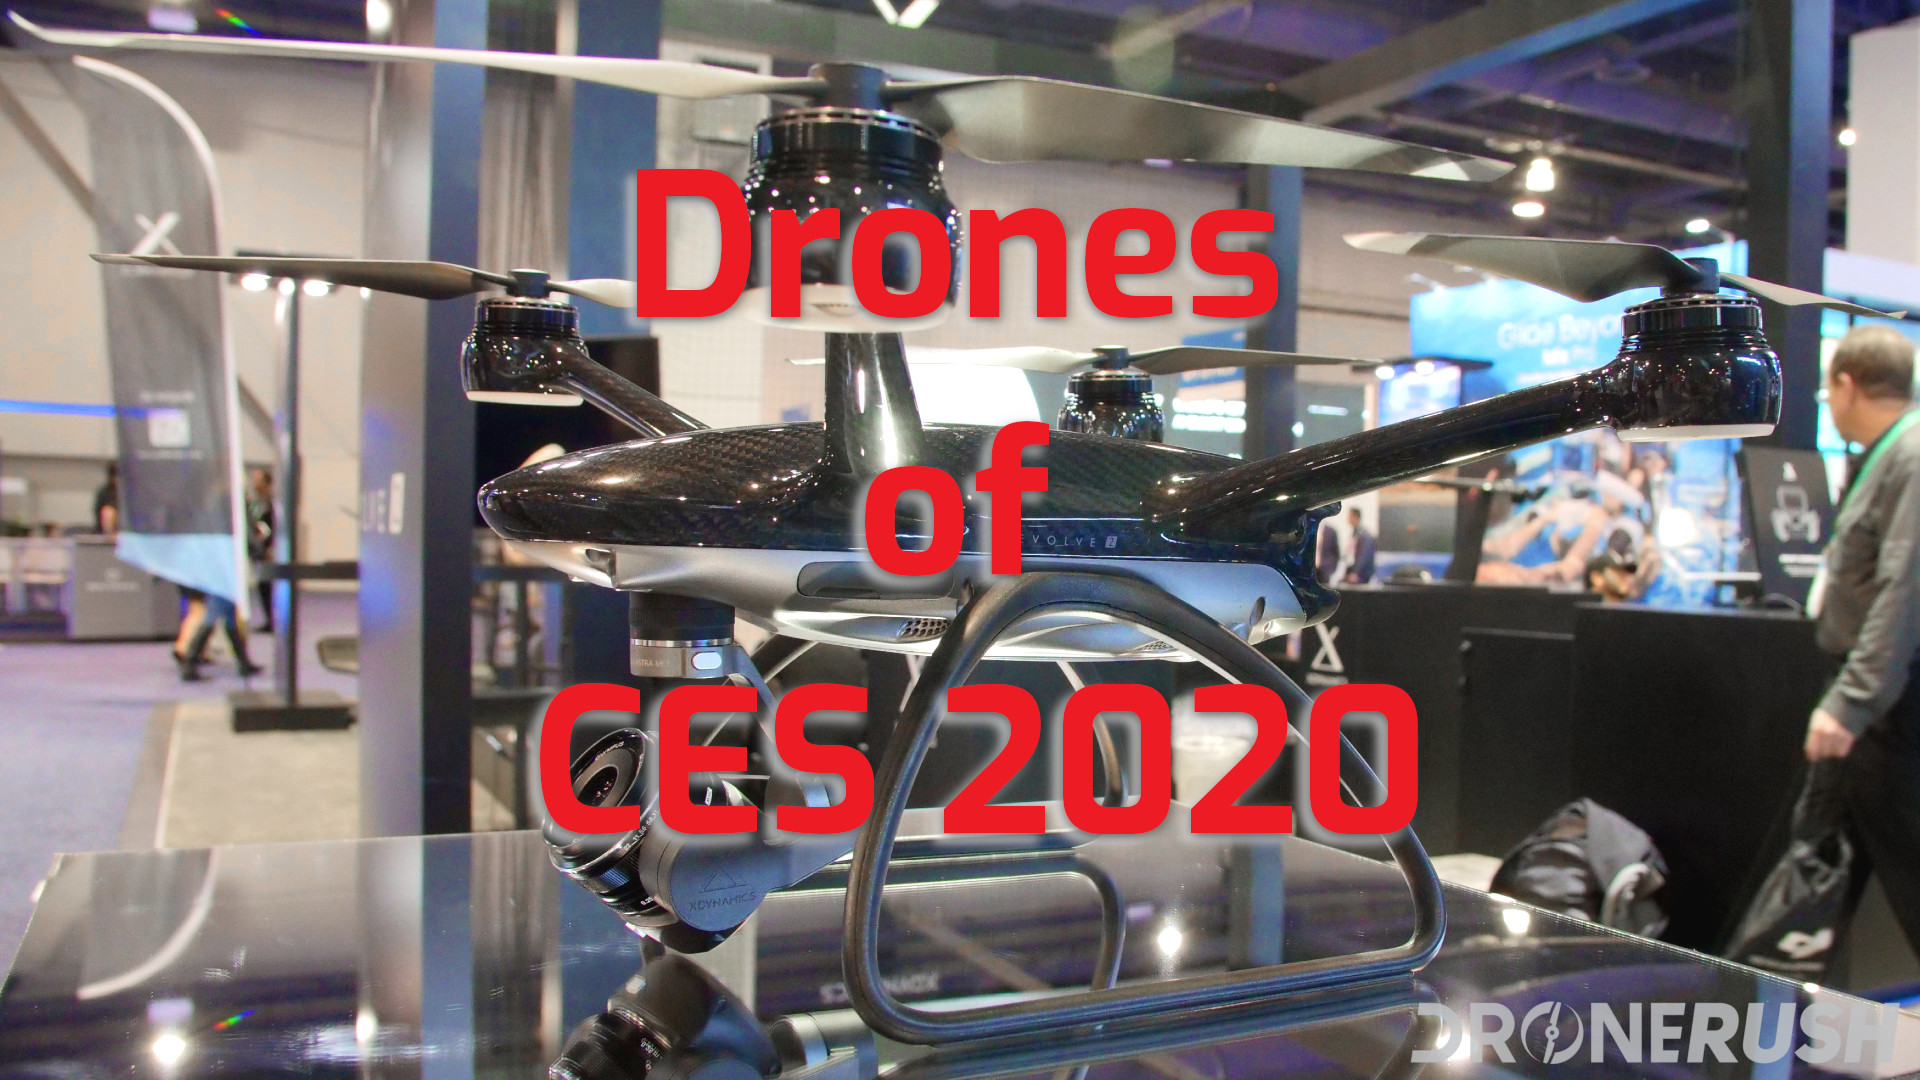 Drone Rush Drones of CES 2020